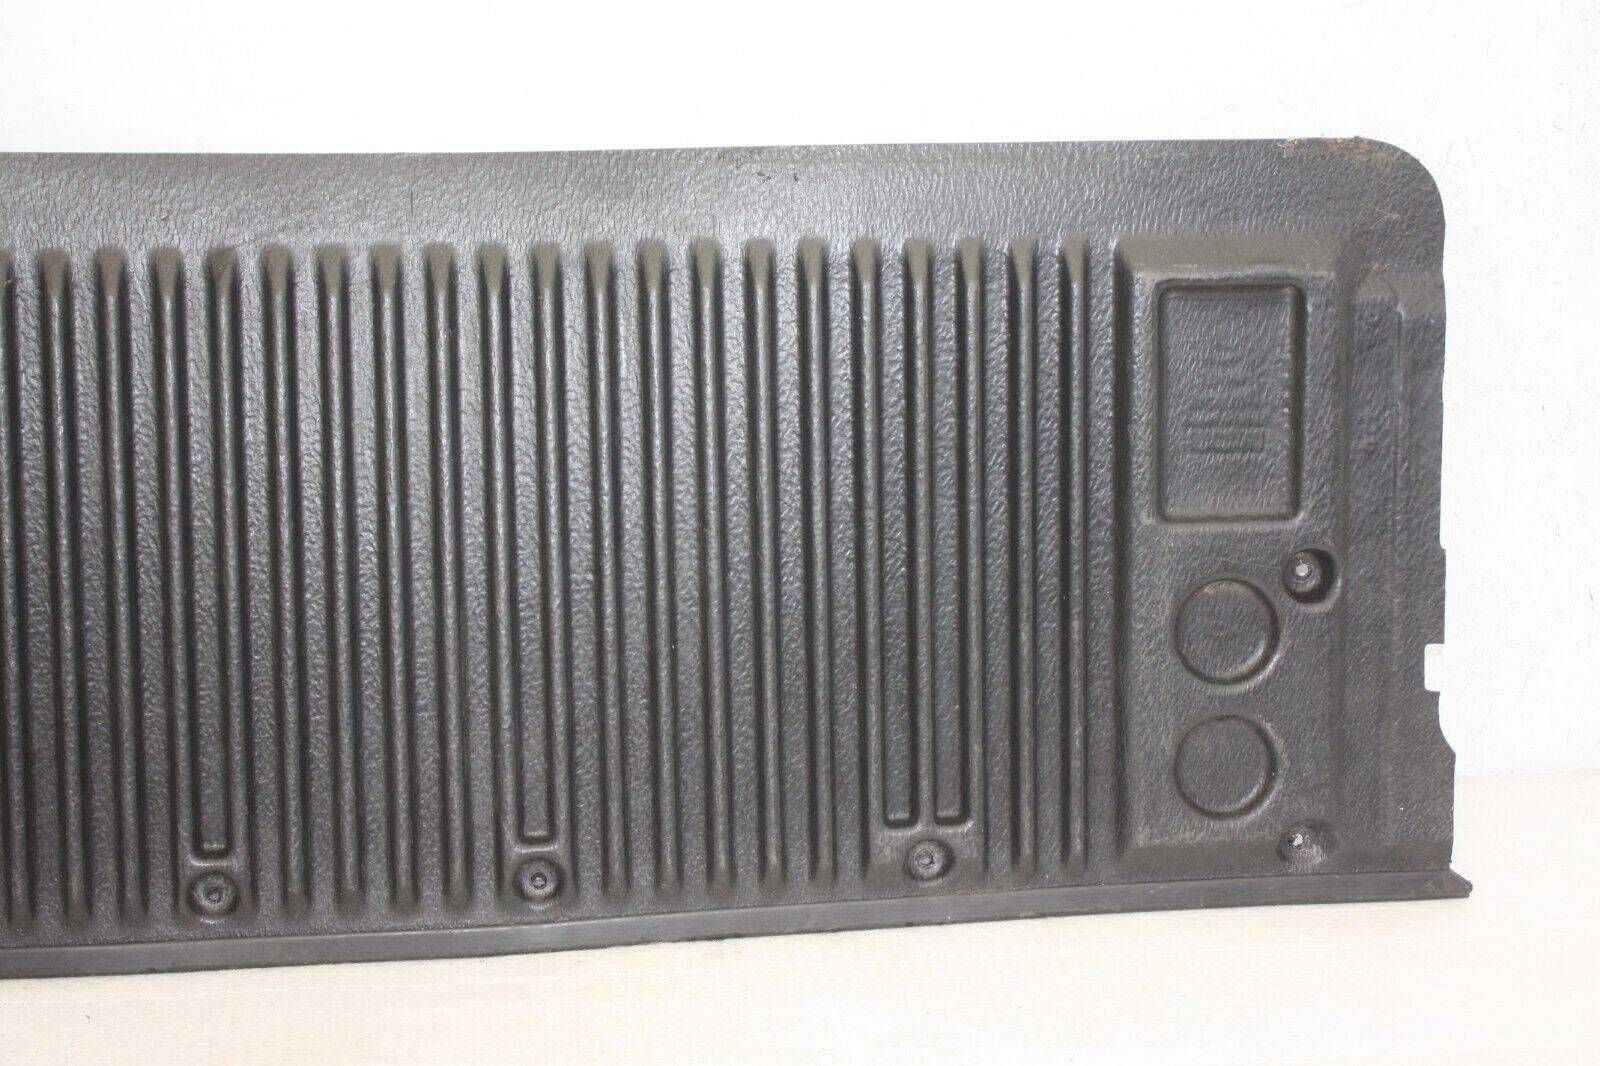 Ford-Ranger-Tailgate-Liner-Protector-Cover-AB39-2140726-Genuine-176321614493-6